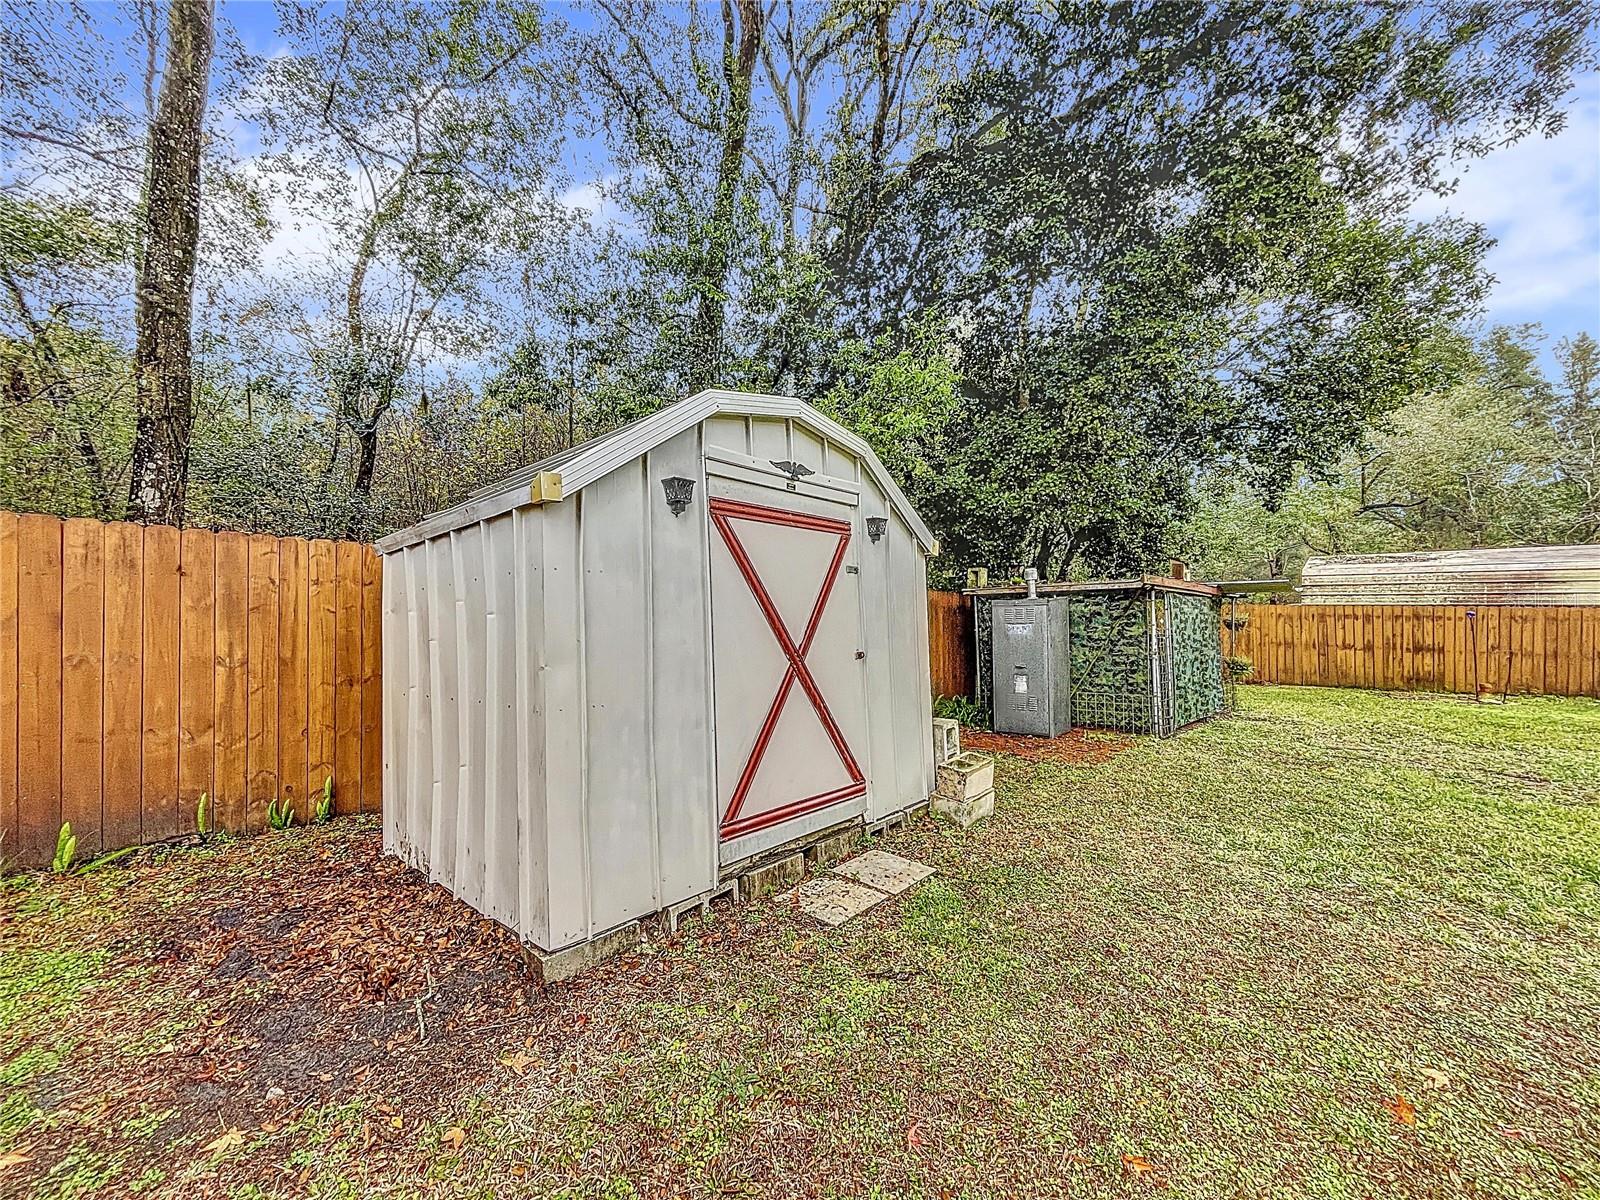 Shed at Back of Property